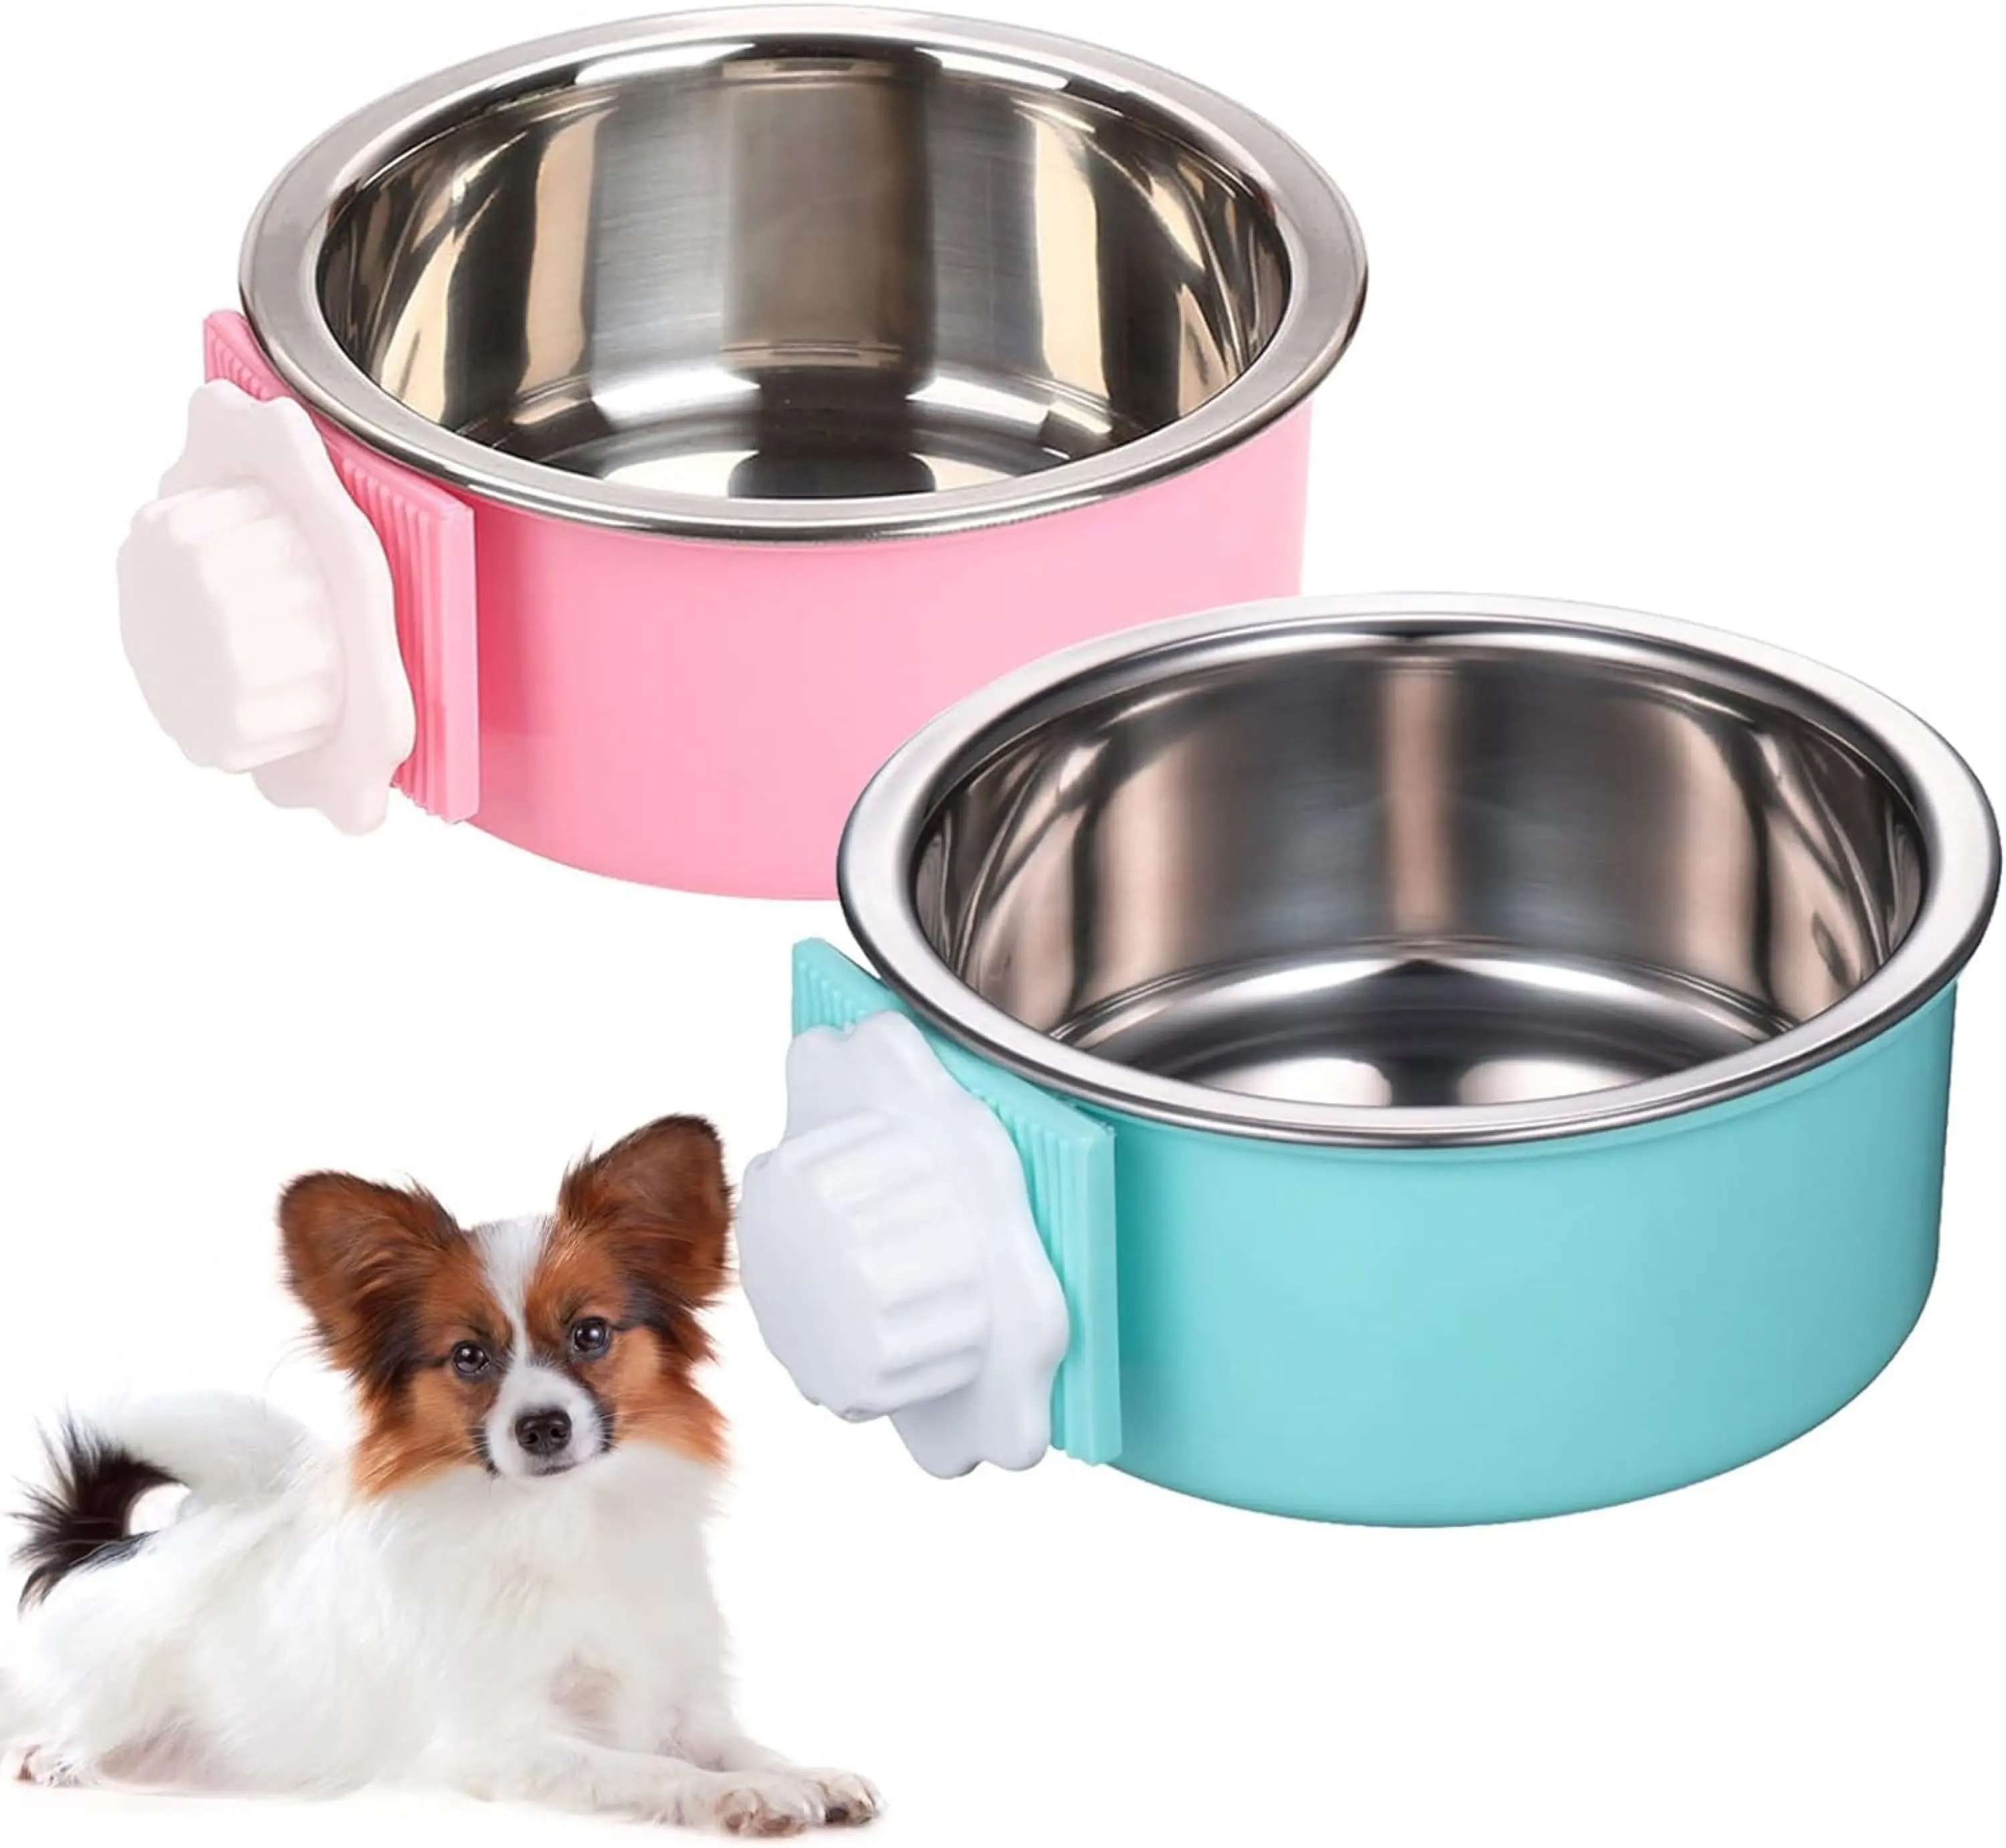 Wholesale Cheap Round Removable Hanging 2-in-1 Plastic Bowl & Stainless Steel Crate Dog Bowl Food Water Feeder